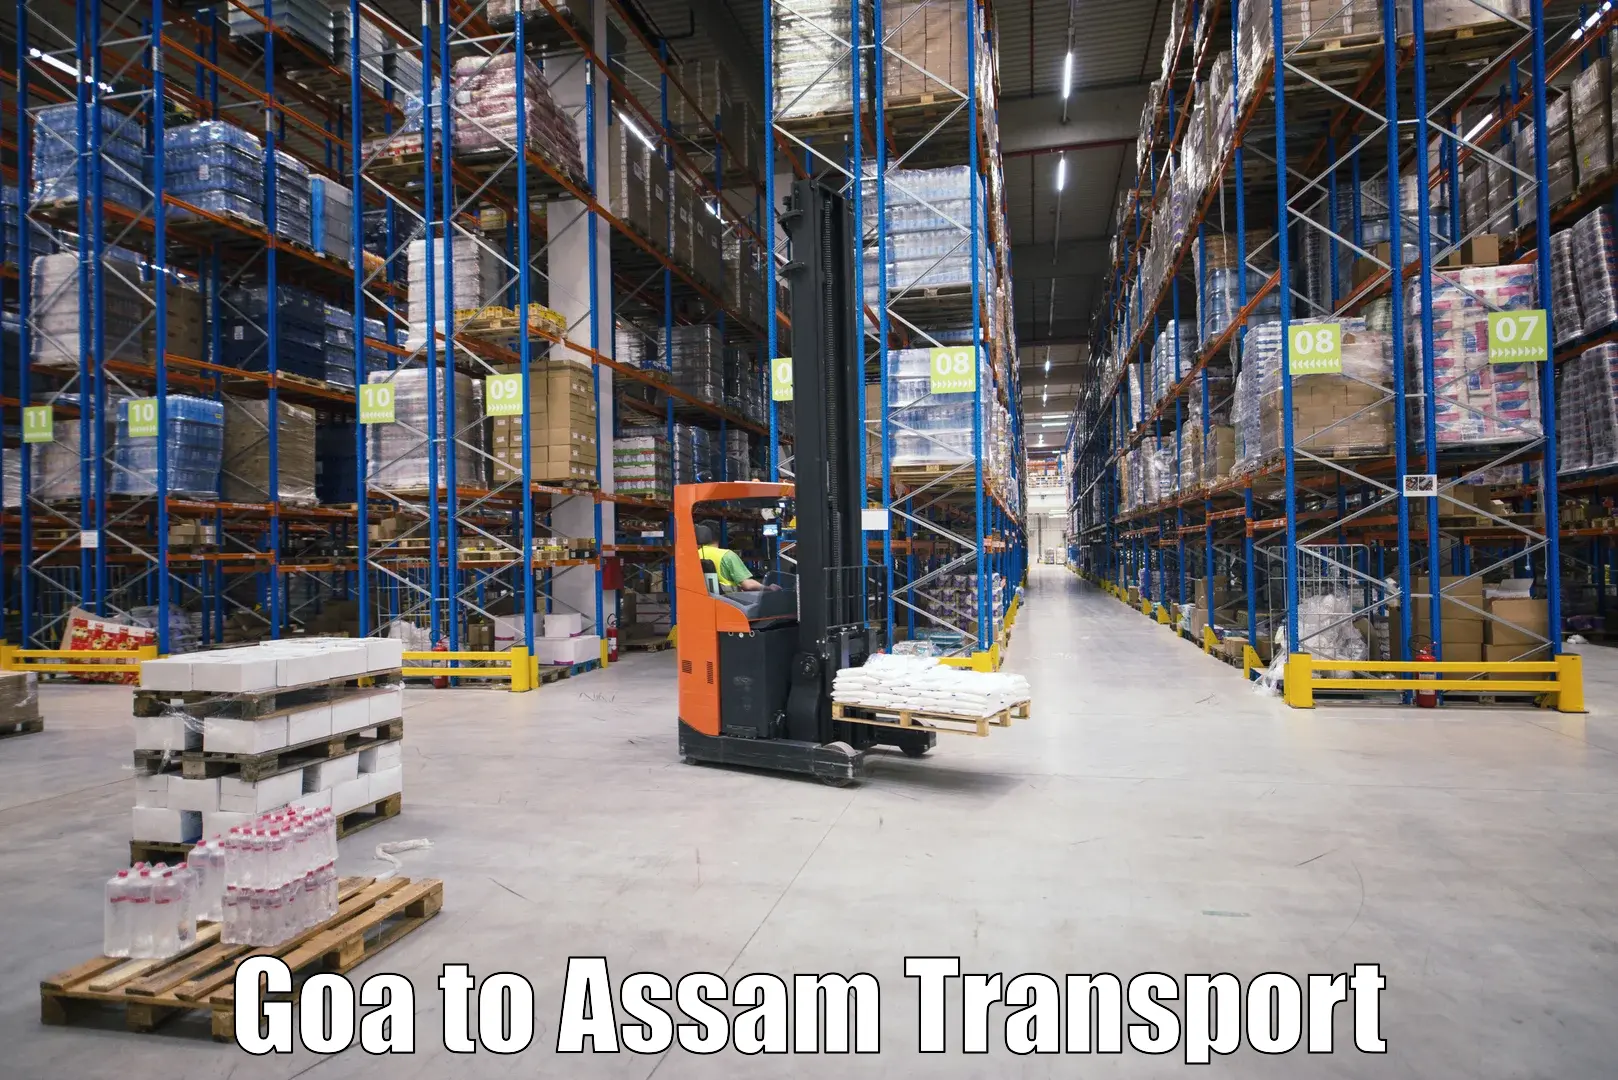 Transport bike from one state to another Goa to Guwahati University